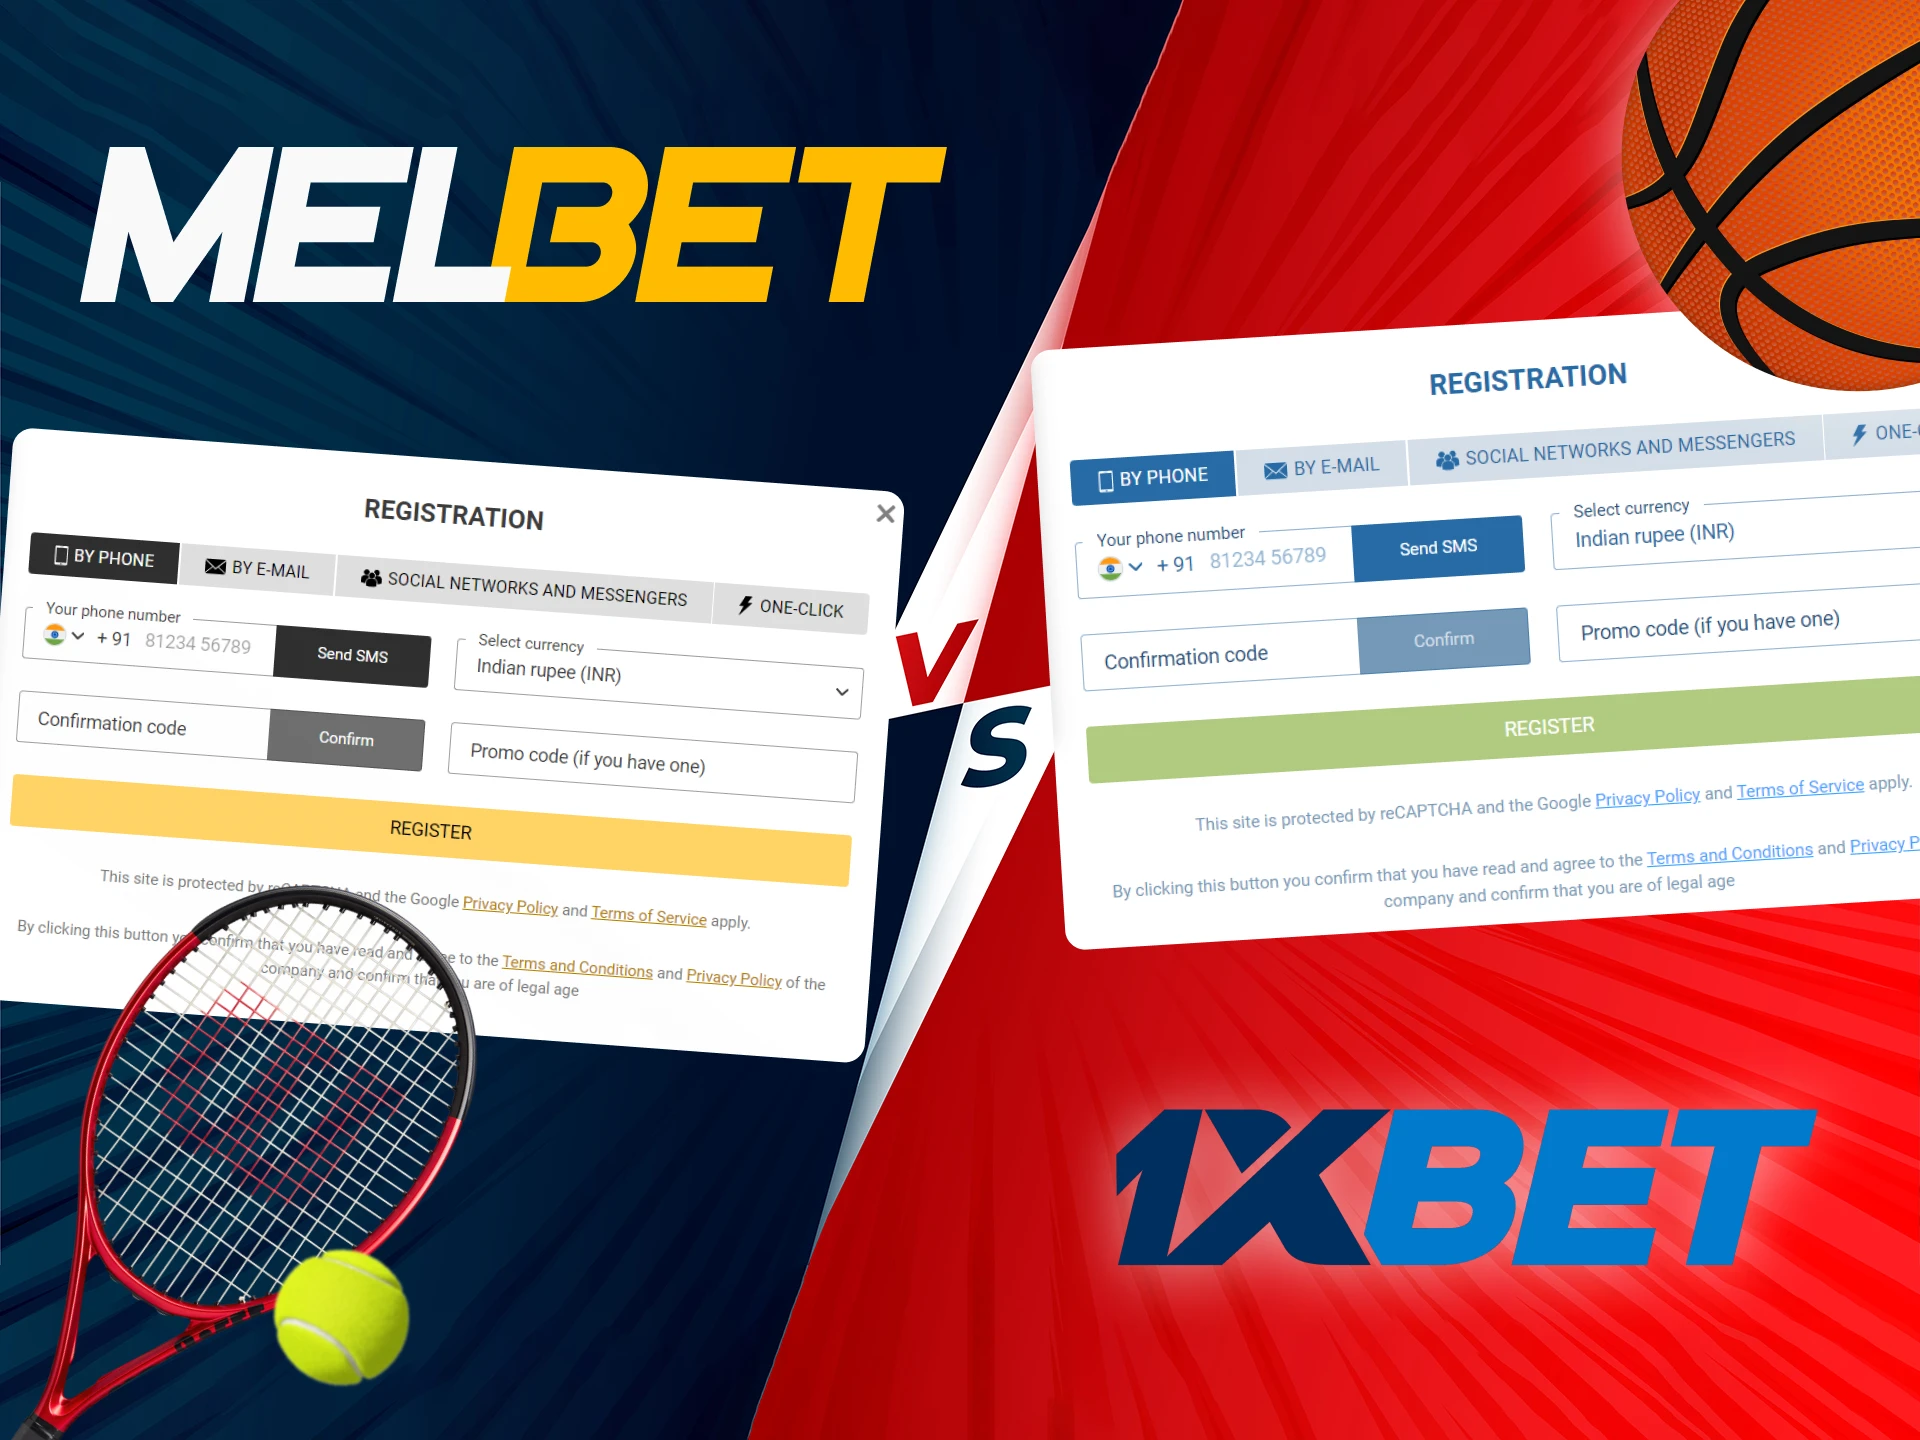 Compare the differences in the registration process between 1xbet and Melbet, and start betting.